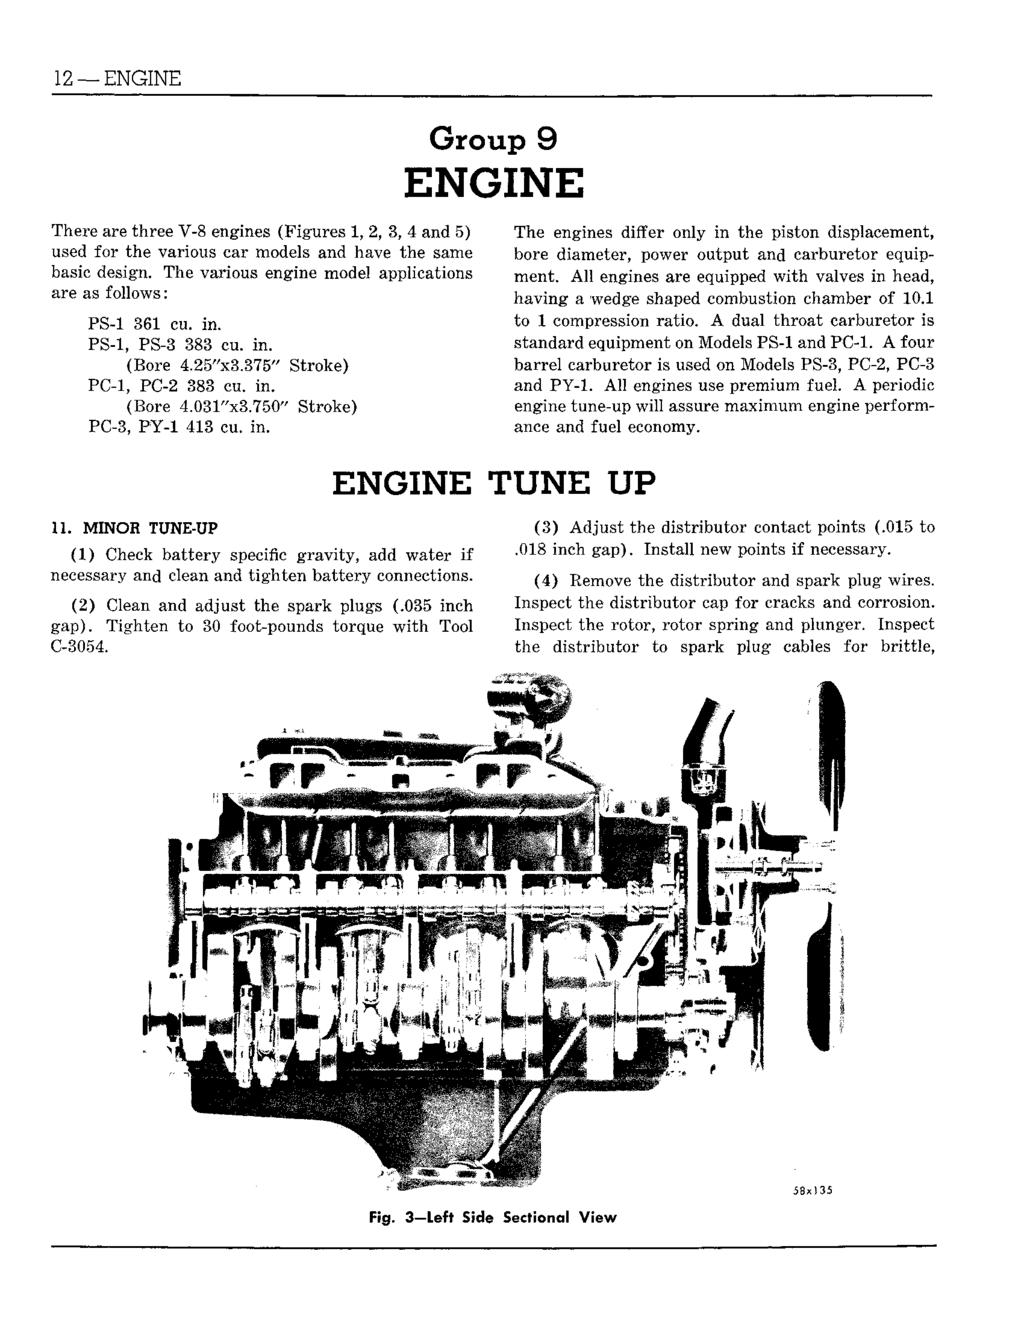 12 ENGINE Group 9 ENGINE There are three V-8 engines (Figures 1, 2, 3, 4 and 5) used for the various car models and have the same basic design.